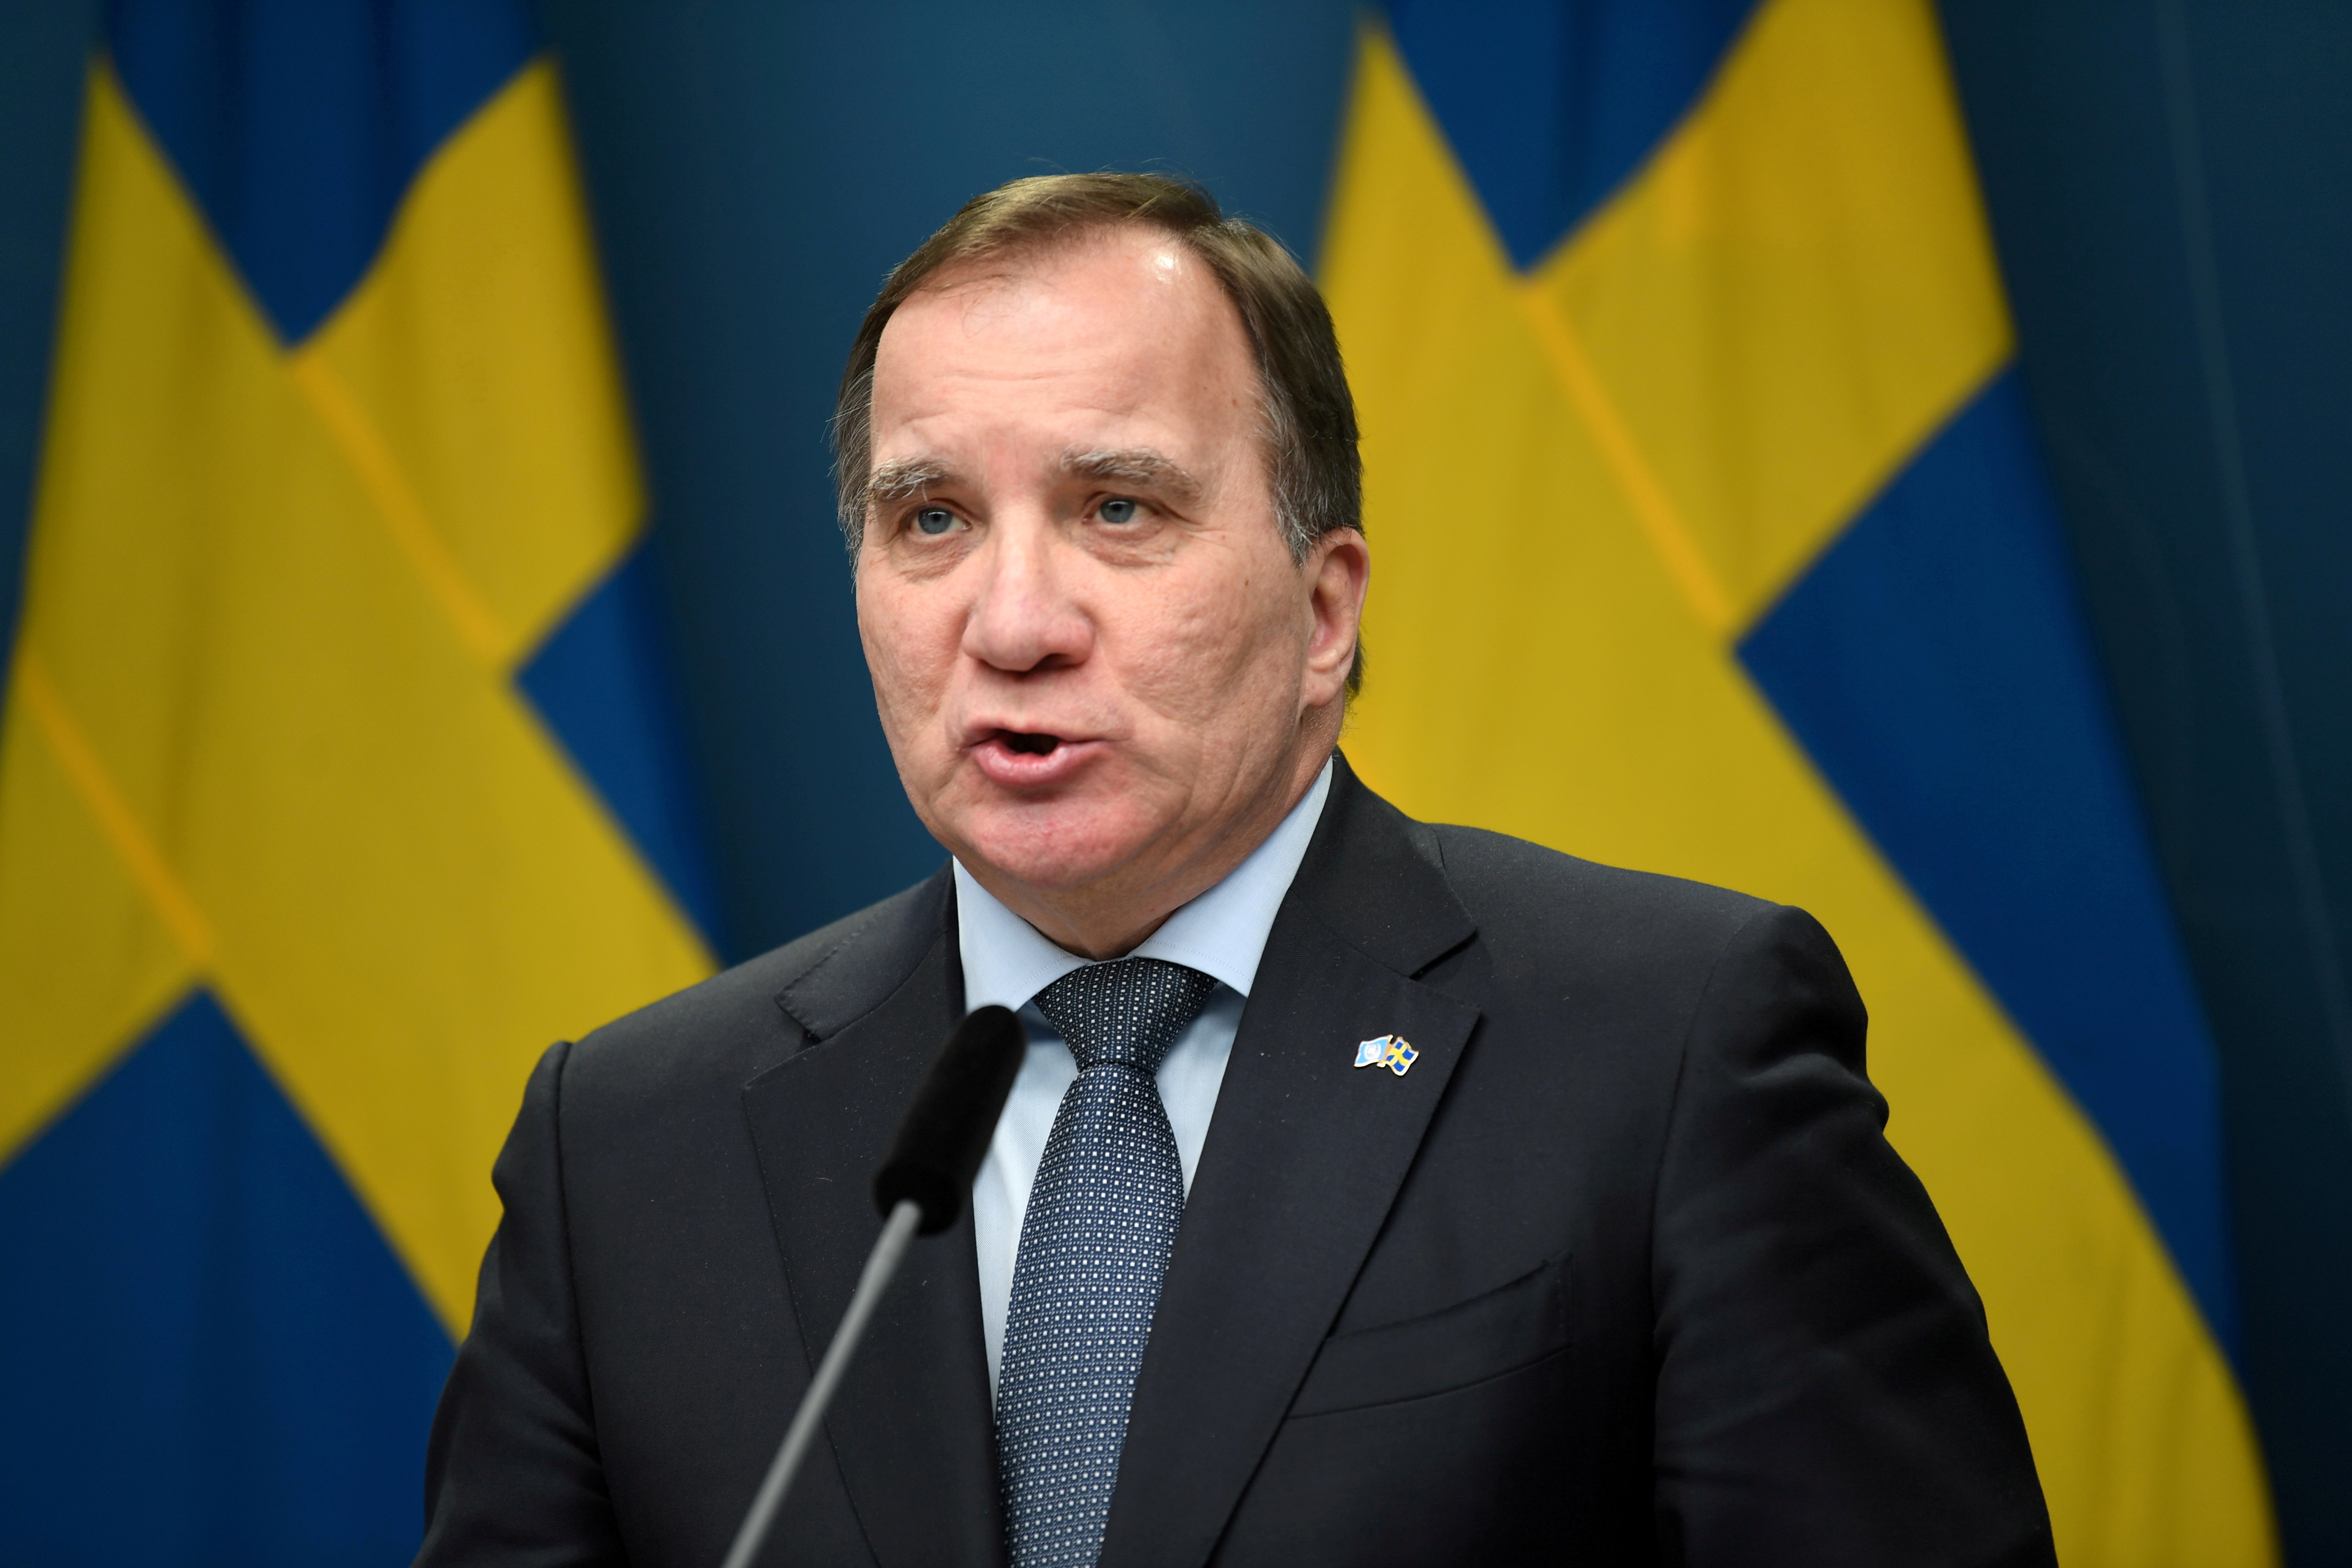 Swedish Prime Minister Stefan Lofven holds a news conference after parliament passes a bill to slow the COVID-19 pandemic